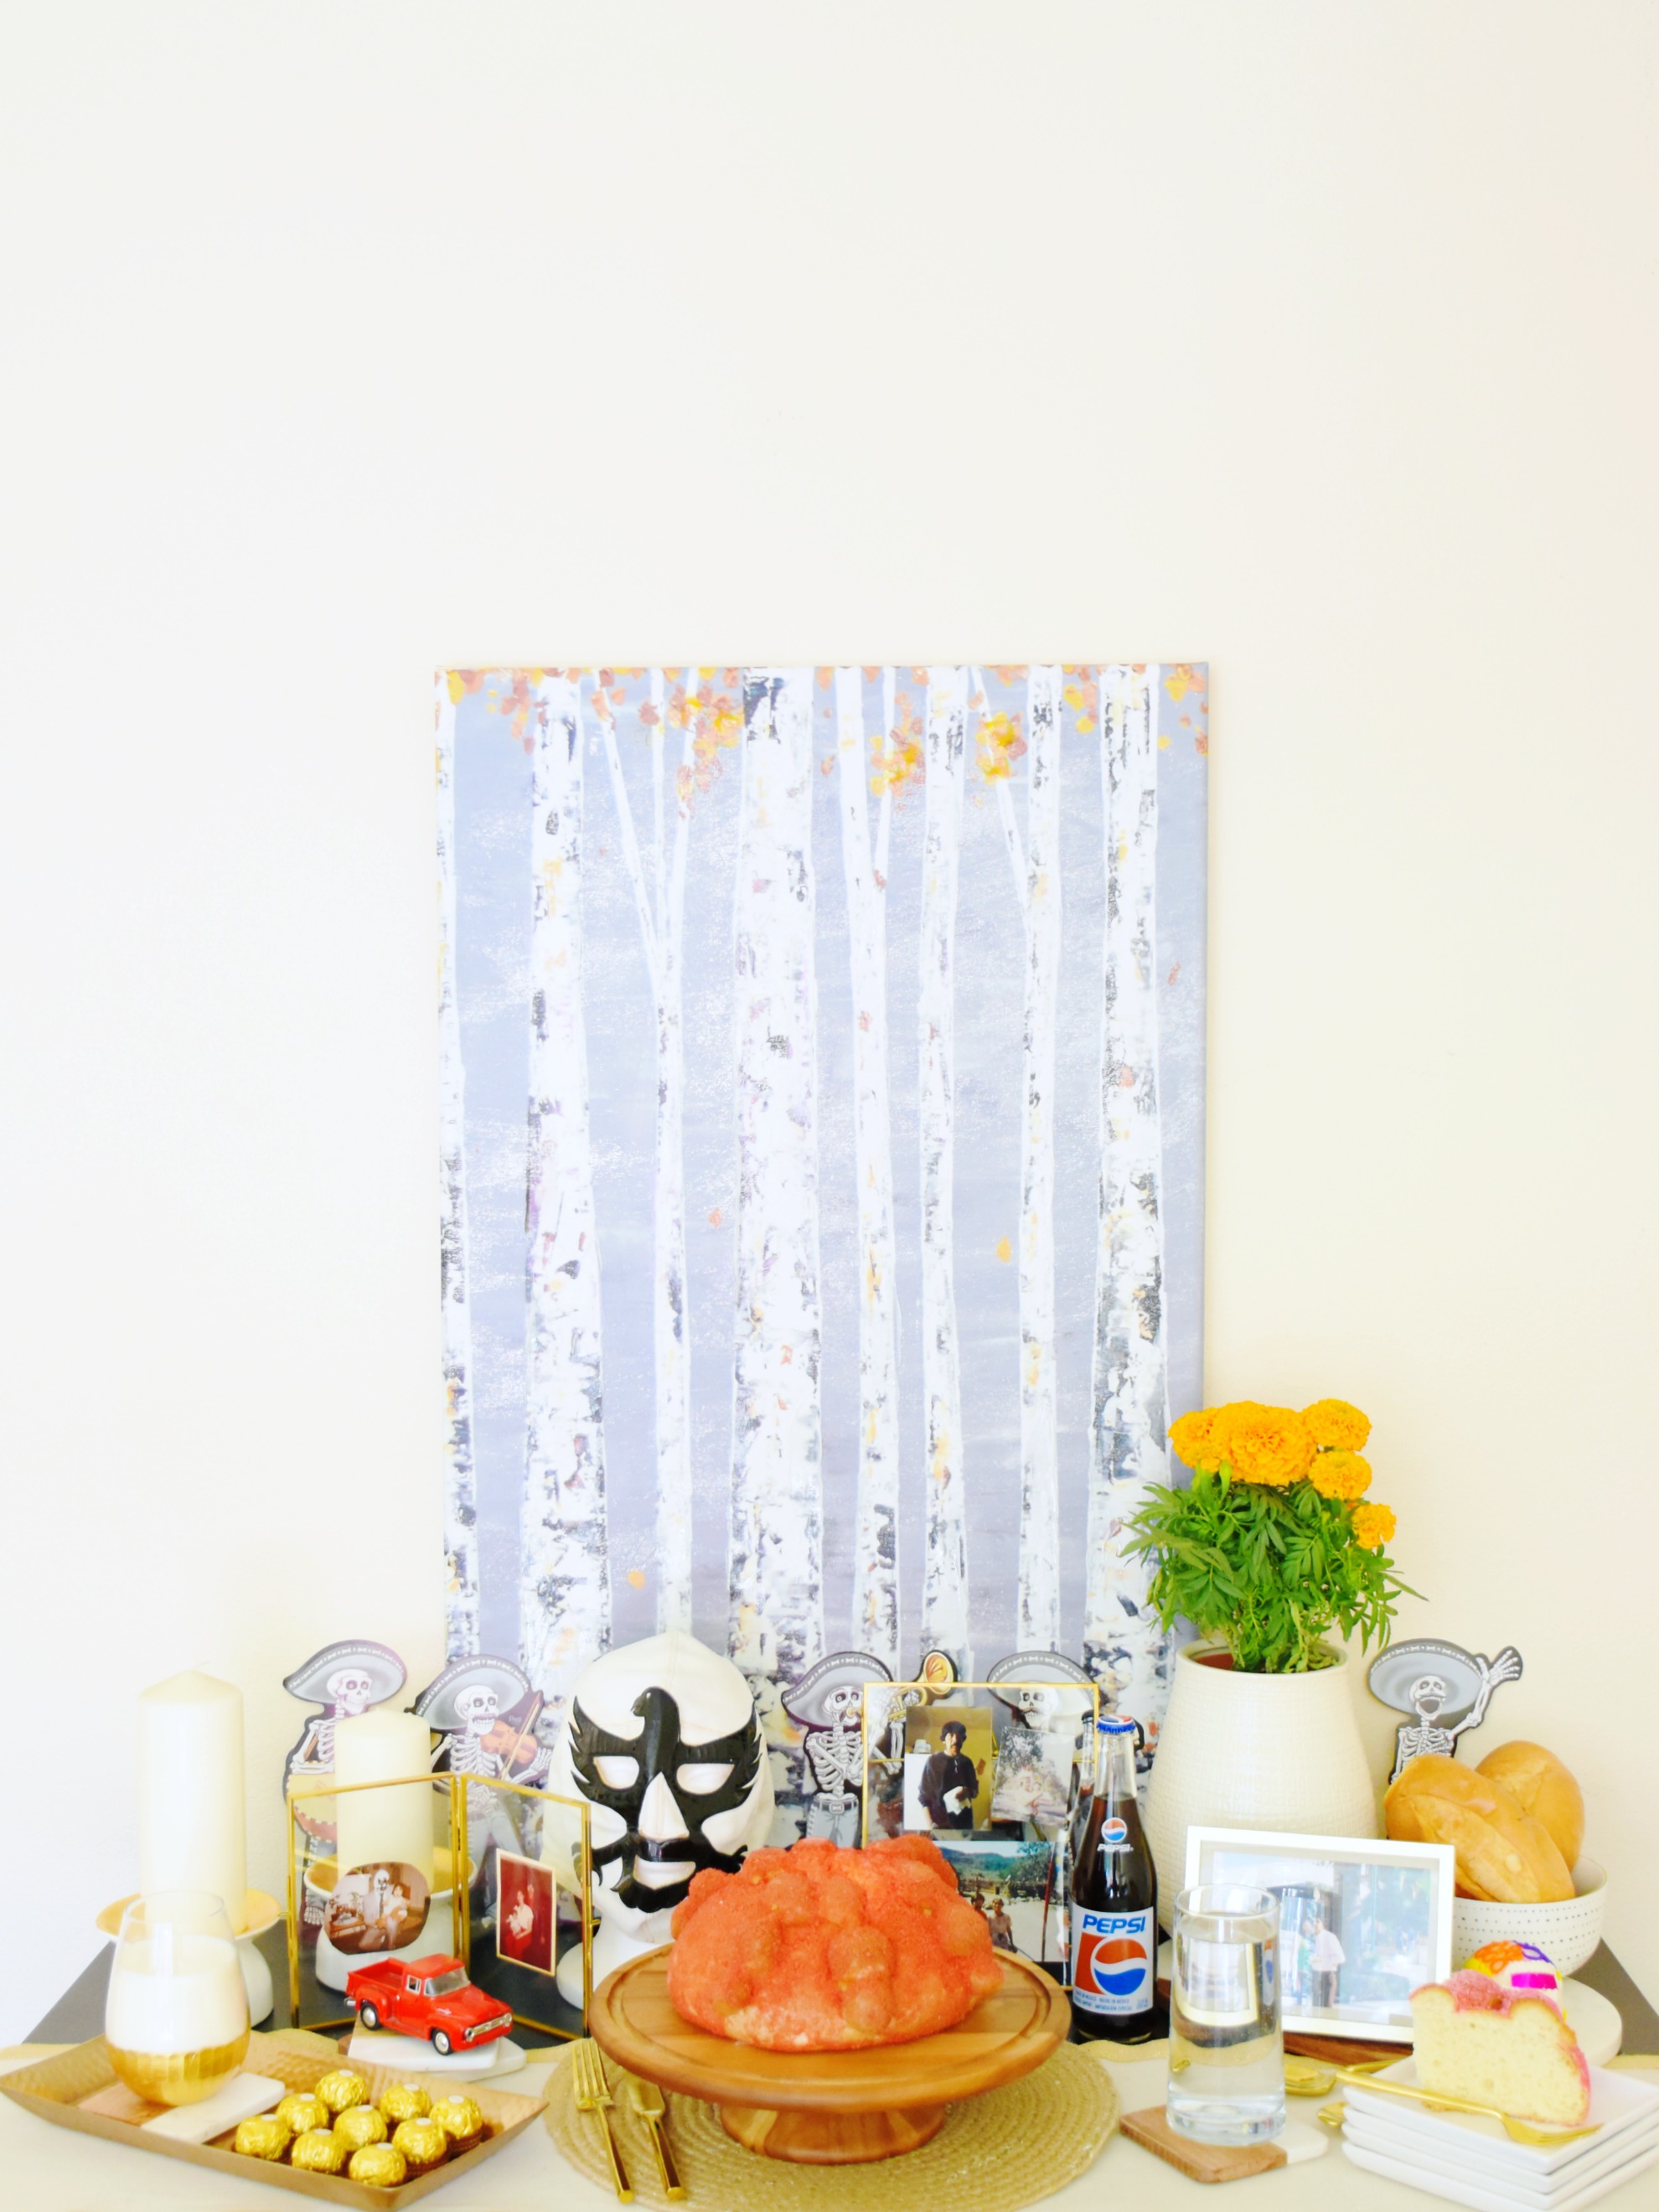 How to make a modern Day of the Dead altar using products found at Target. - LivingMiVidaLoca.com